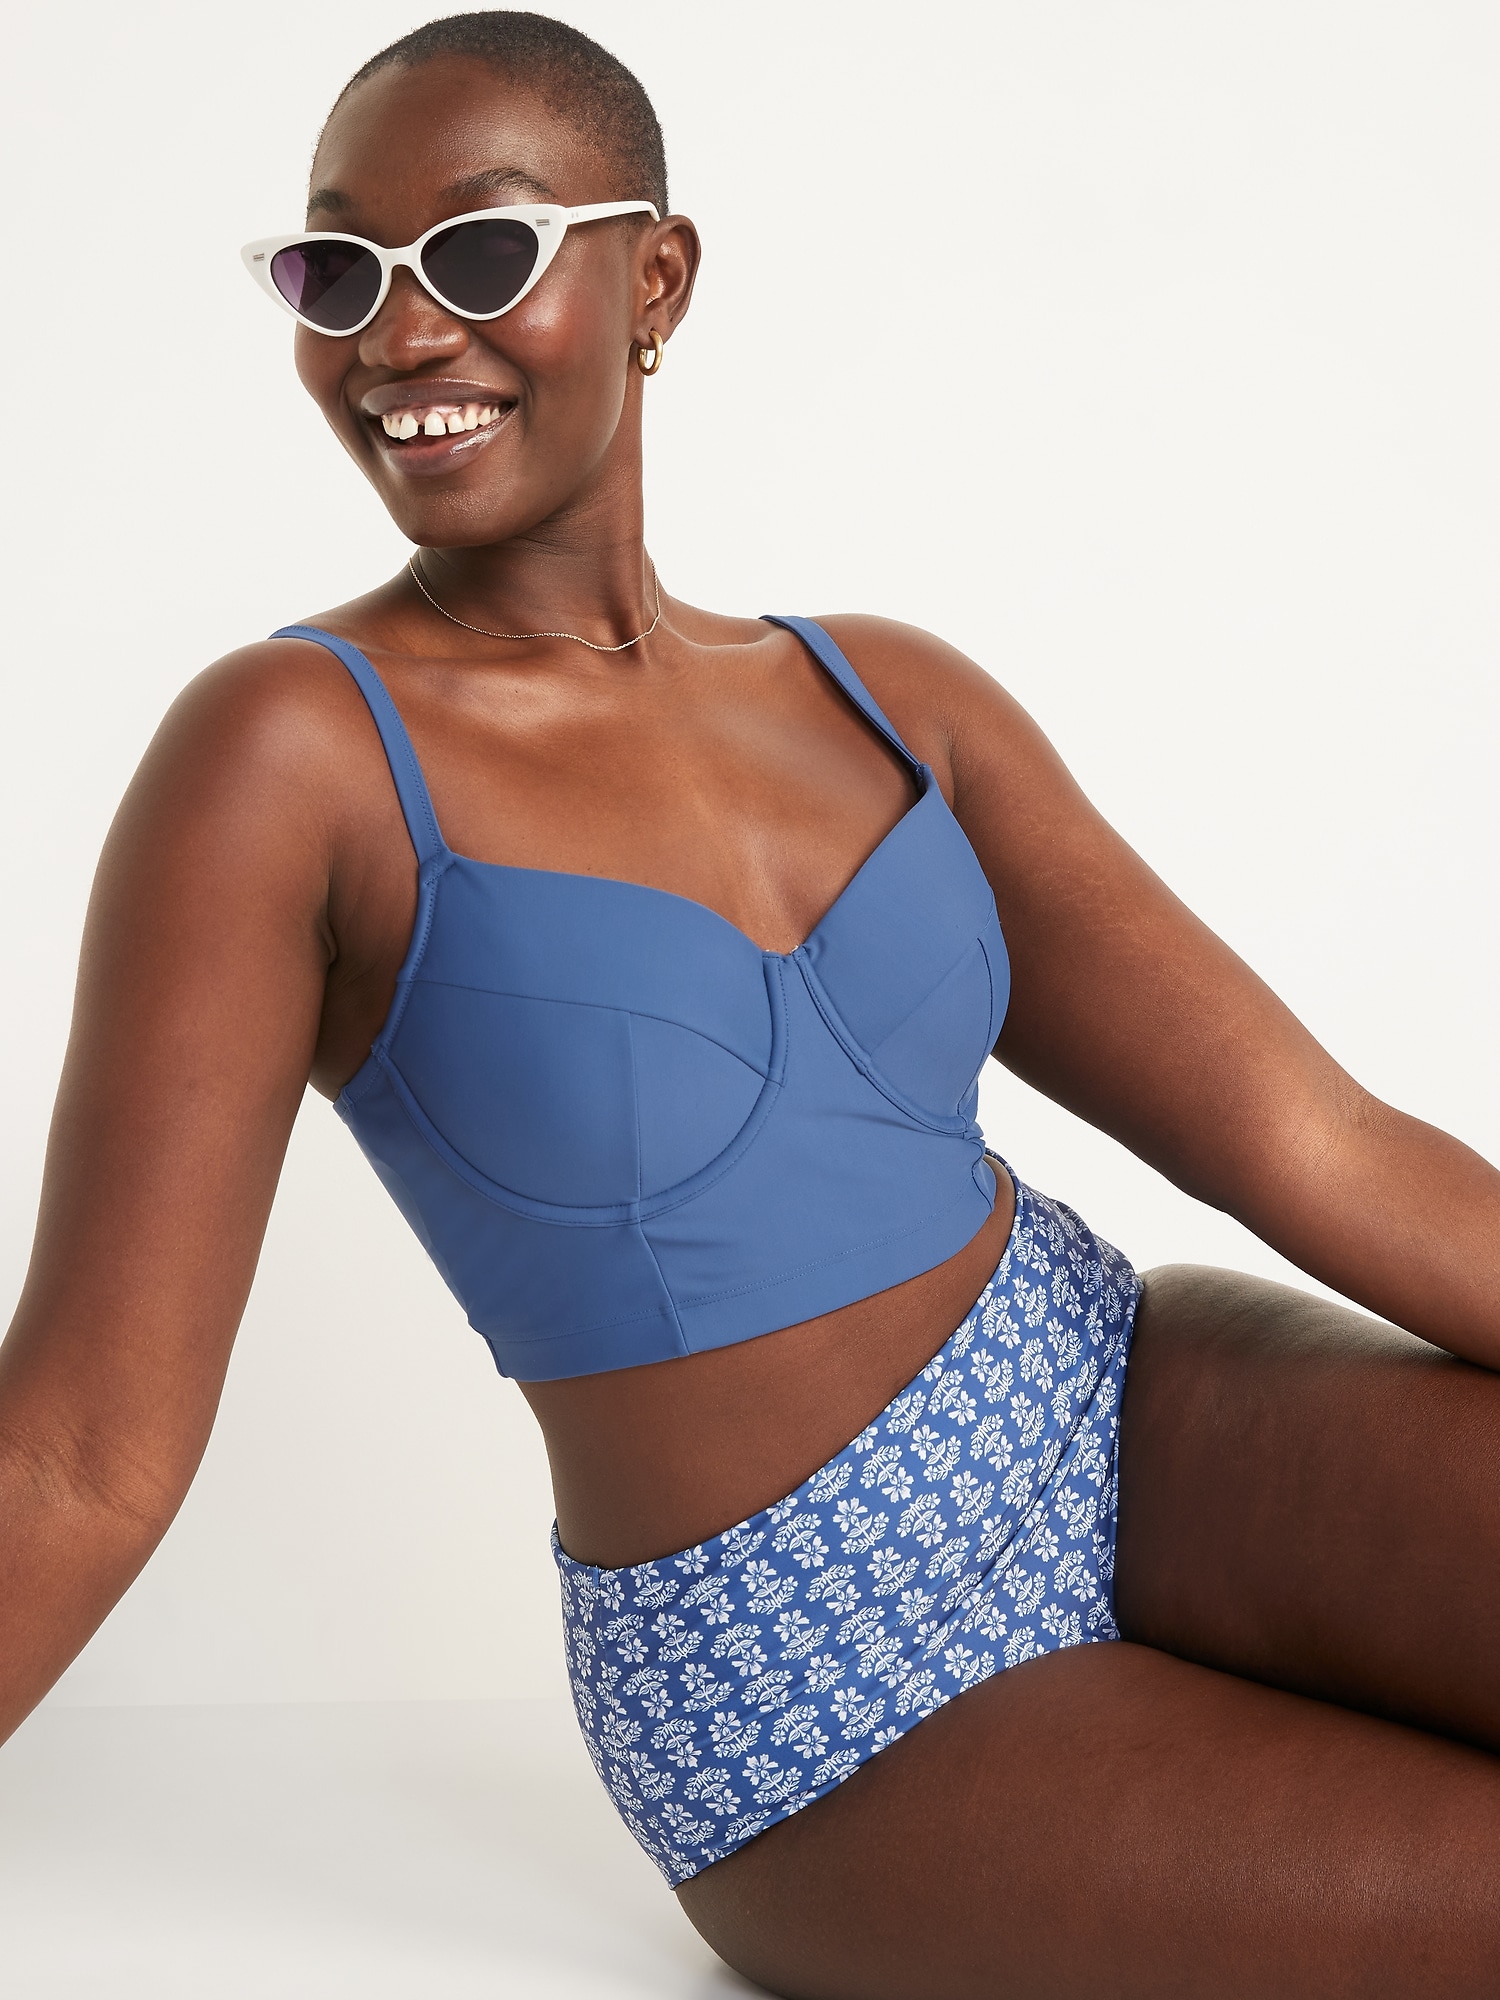 Old Navy Textured Underwire Plus-Size Bralette Swim Top, Curvy Girls,  We've Found the Cutest Swimsuits at Old Navy — From Triangle Tops to  Tankinis